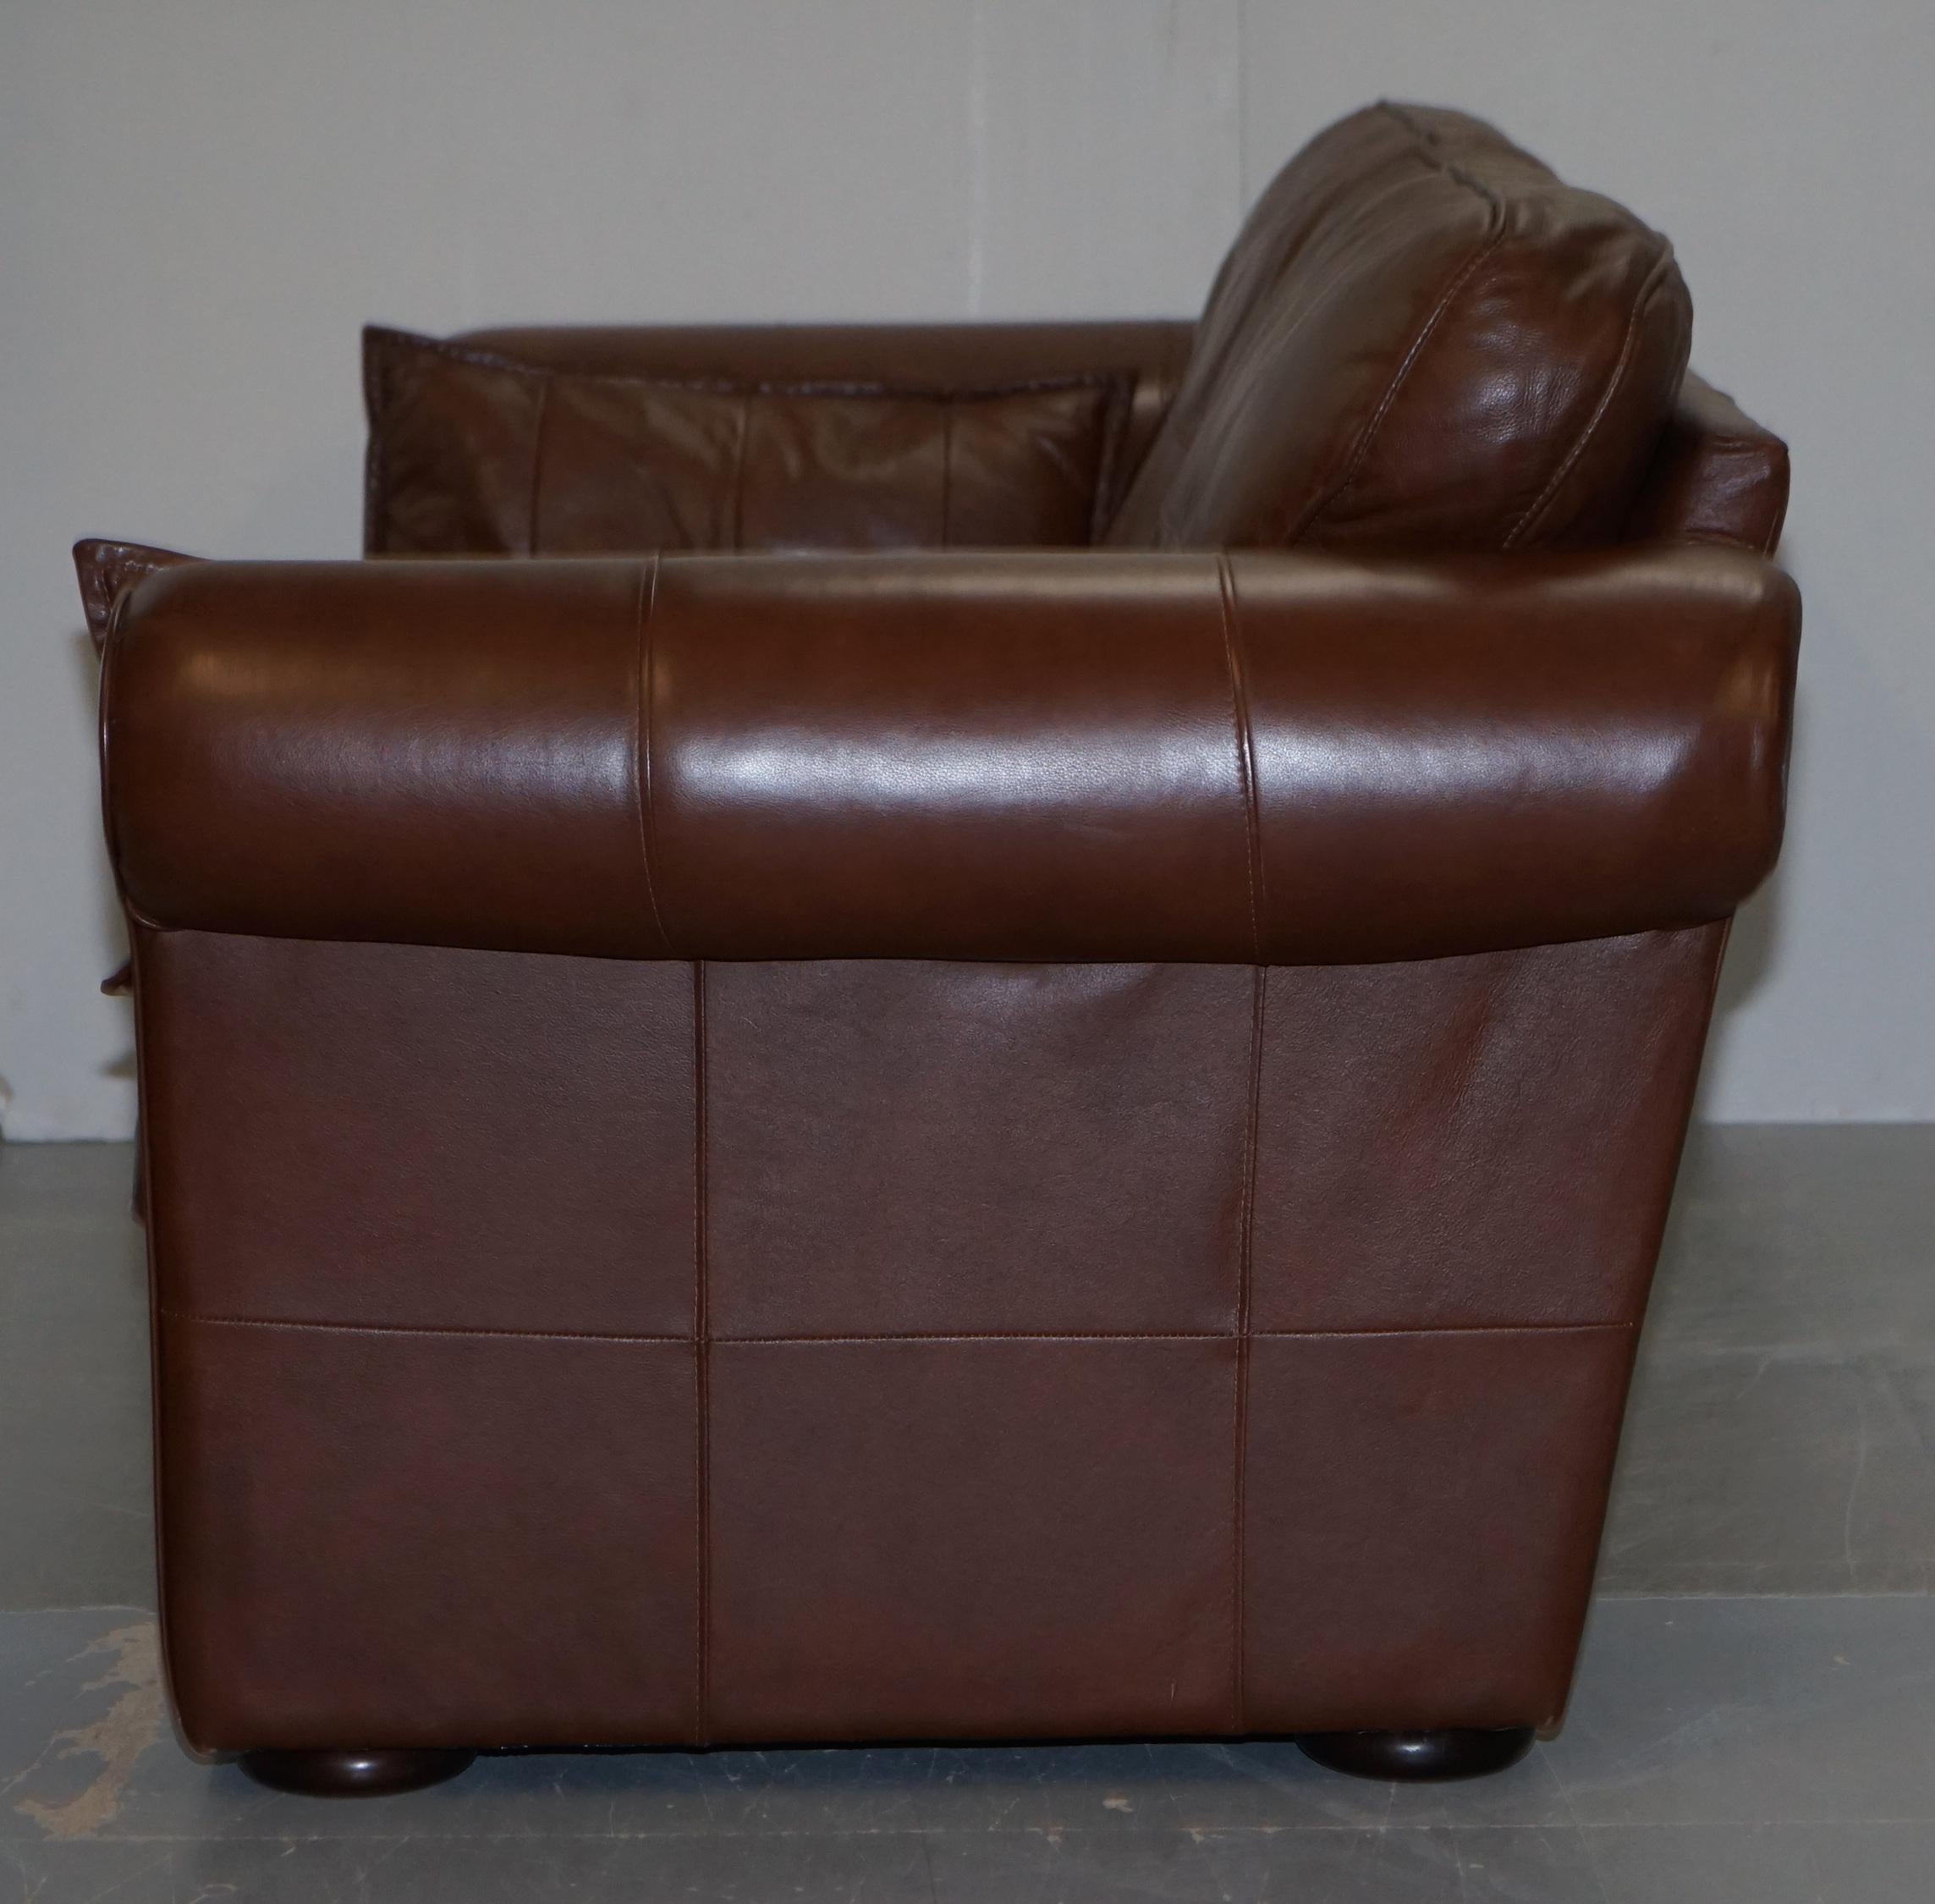 Contemporary Brown Leather Large Comfortable Three Seat Sofa Part of Large Suite 8